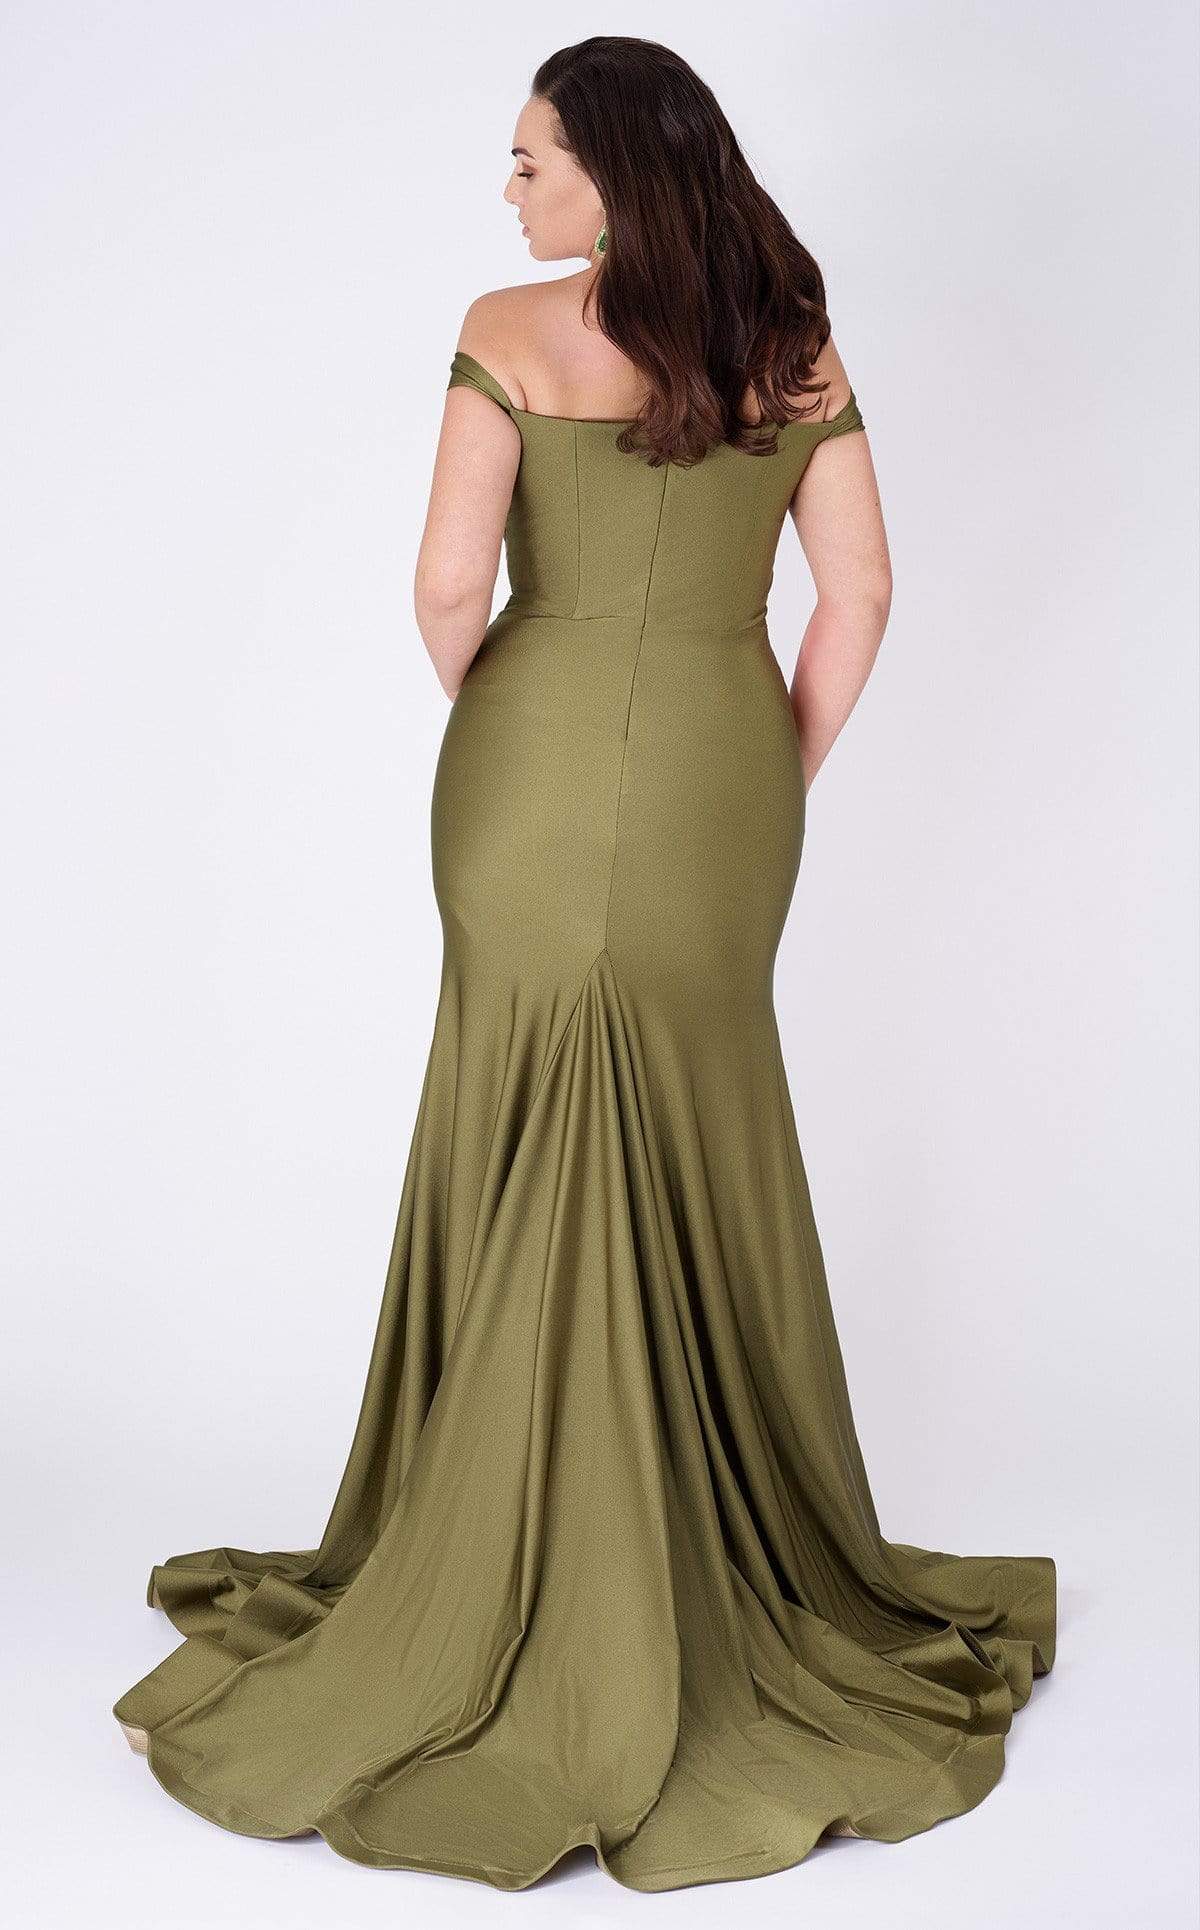 MNM COUTURE - L0044 Tapered V Neck Mermaid Gown Special Occasion Dress